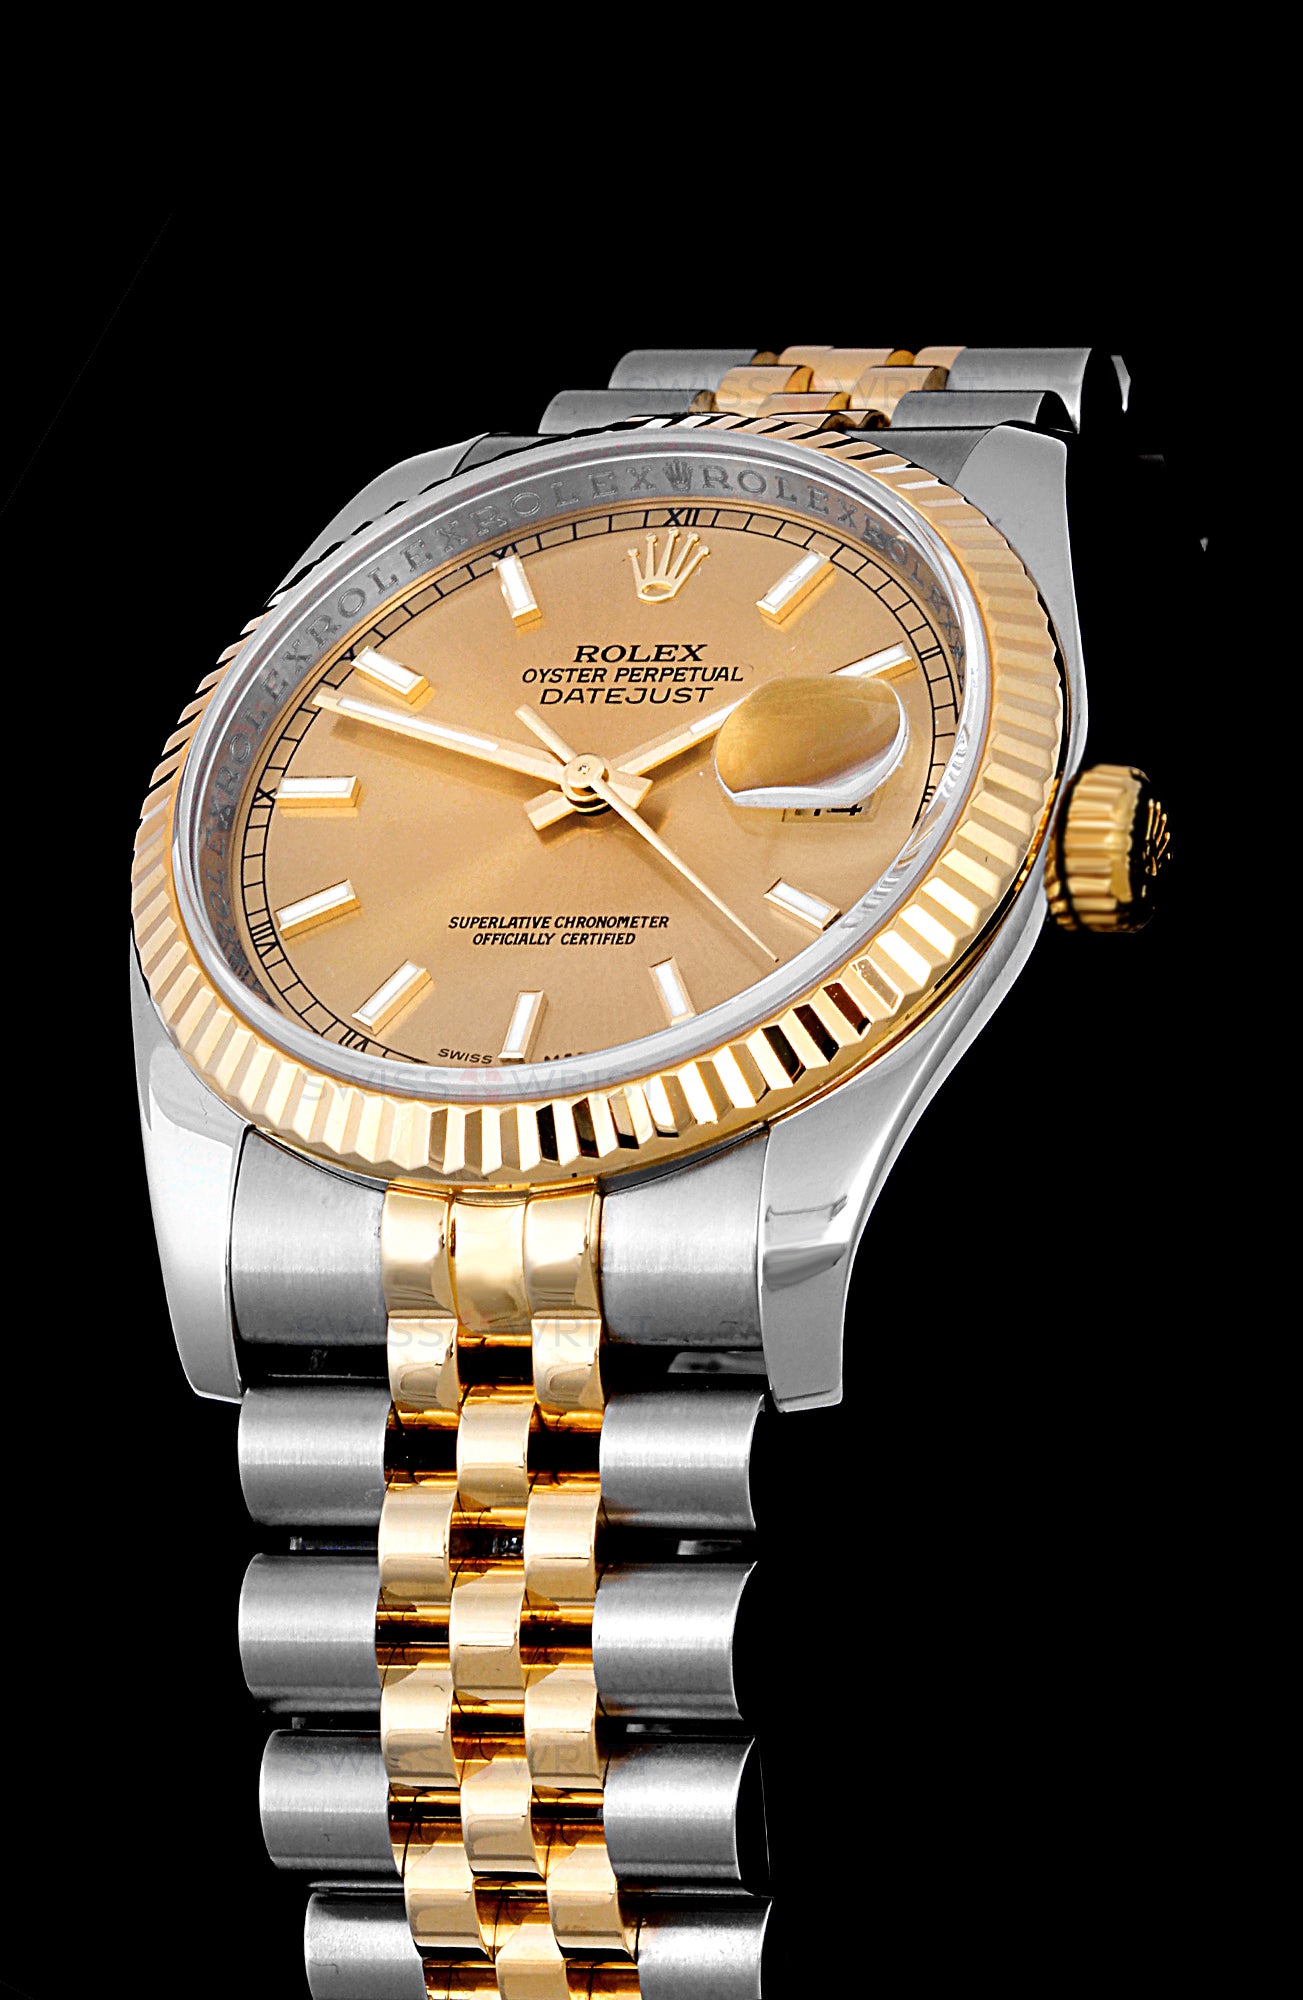 Objector shabby på en ferie Buy and Sell Used Rolex Watches | Swiss Wrist